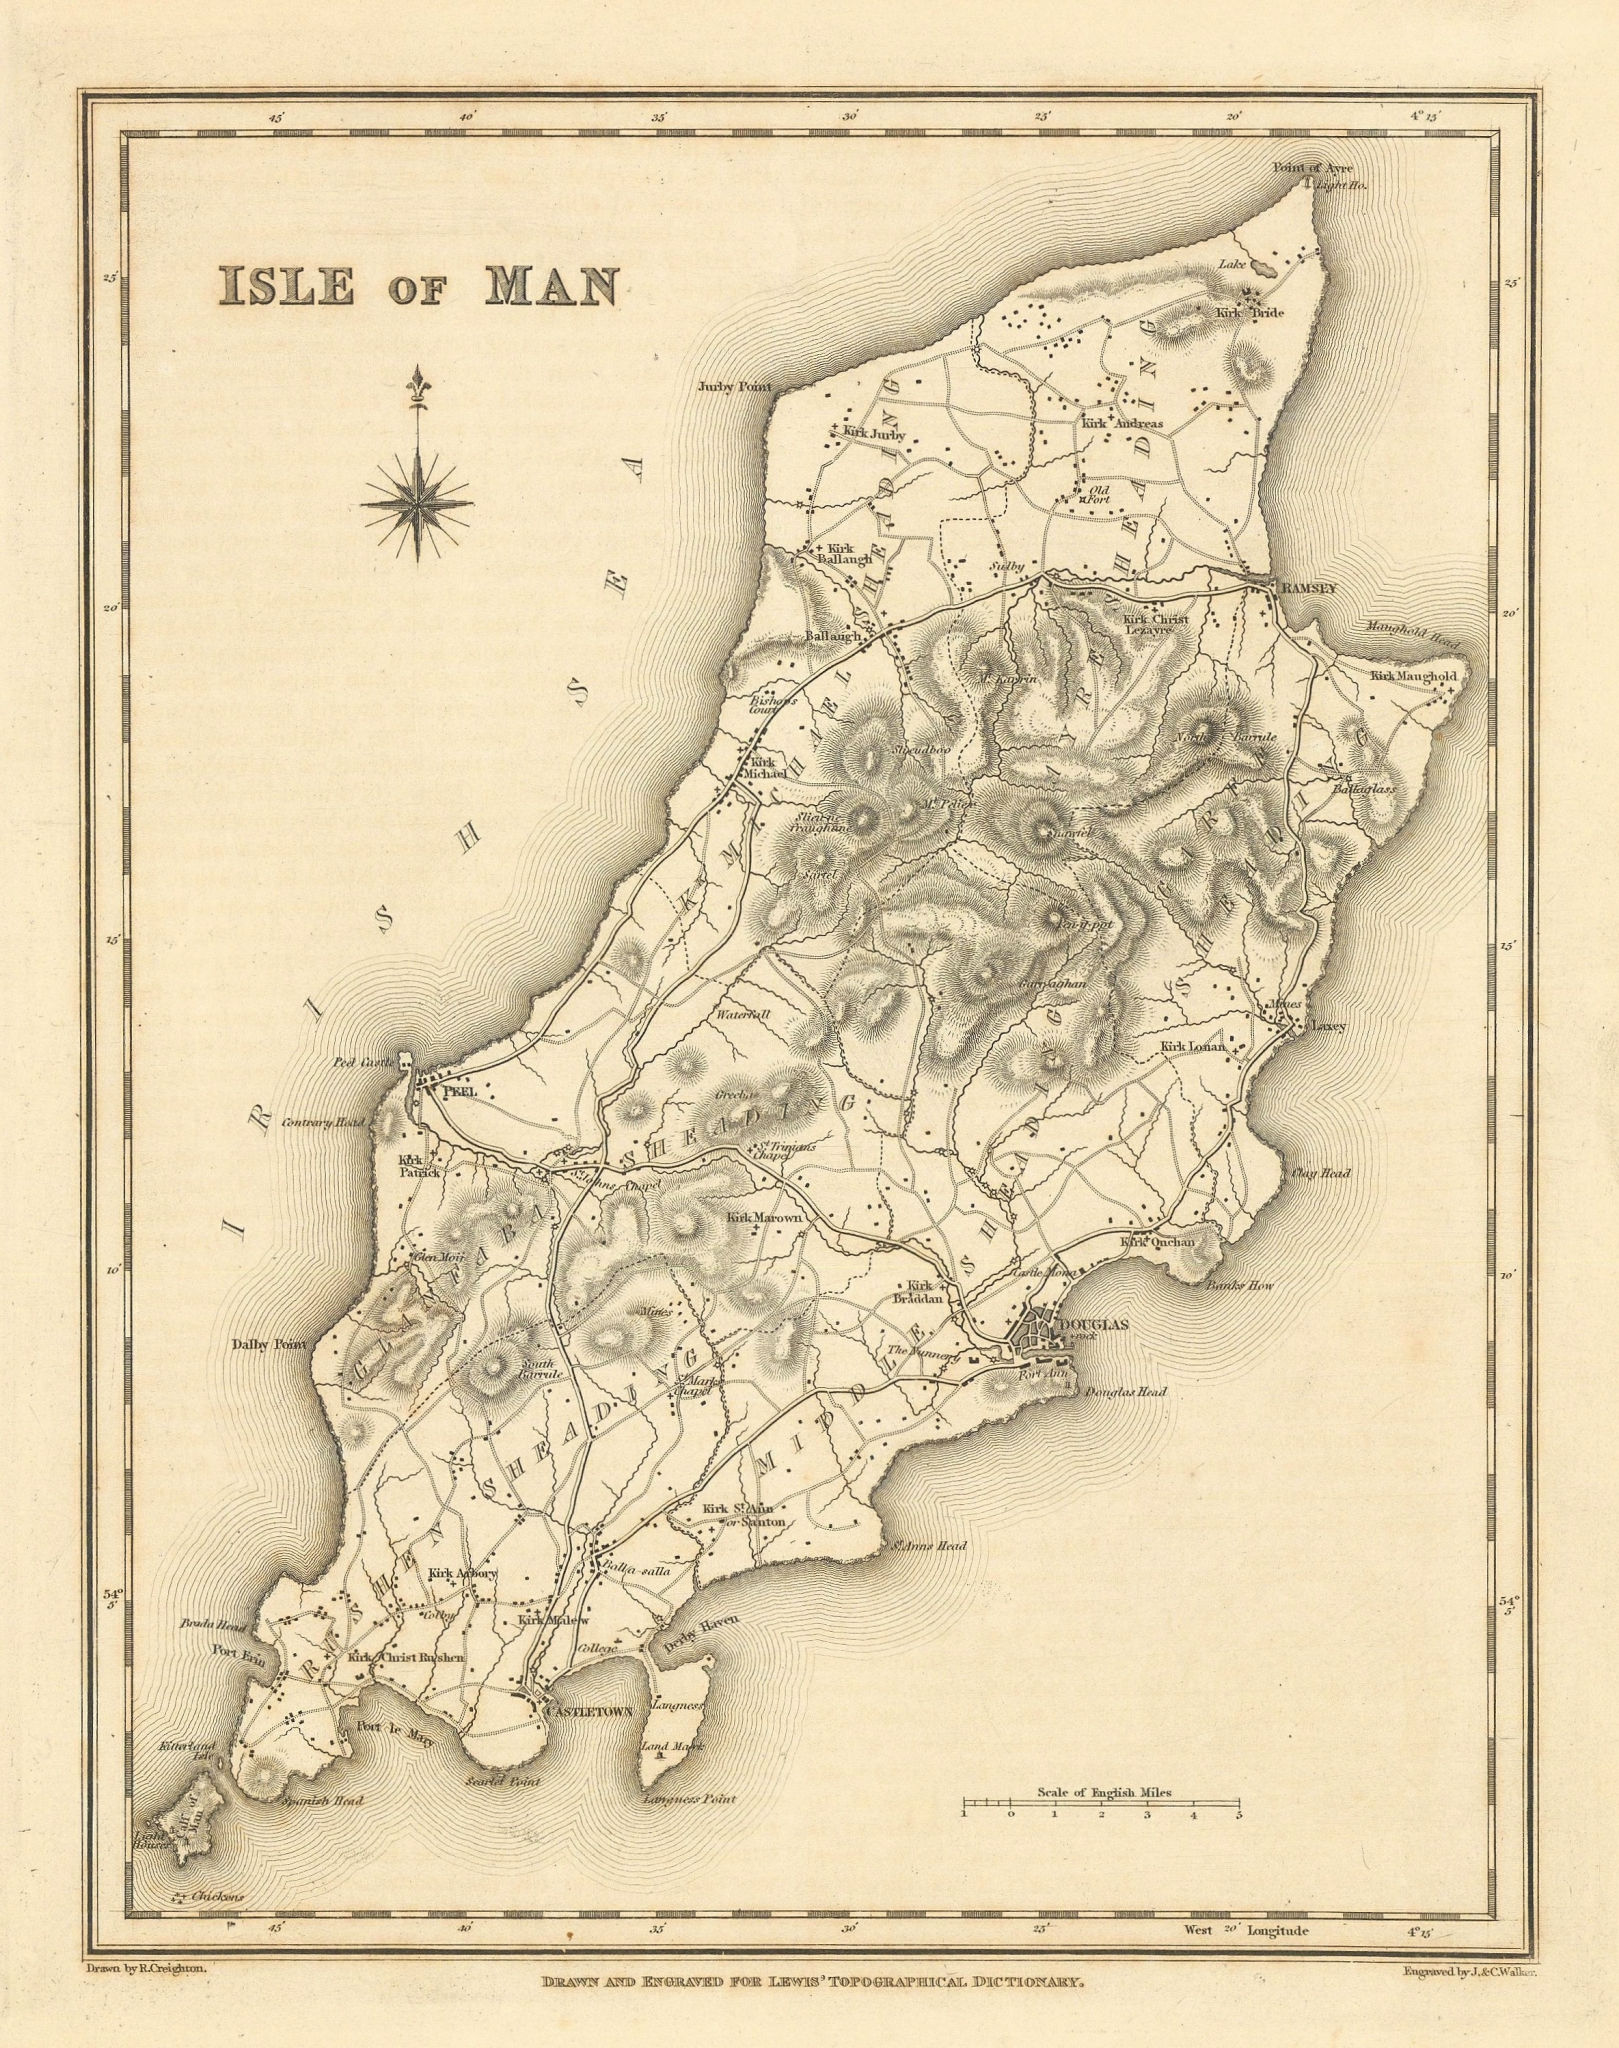 Associate Product Antique map of the ISLE OF MAN by Walker & Creighton for Lewis c1840 old